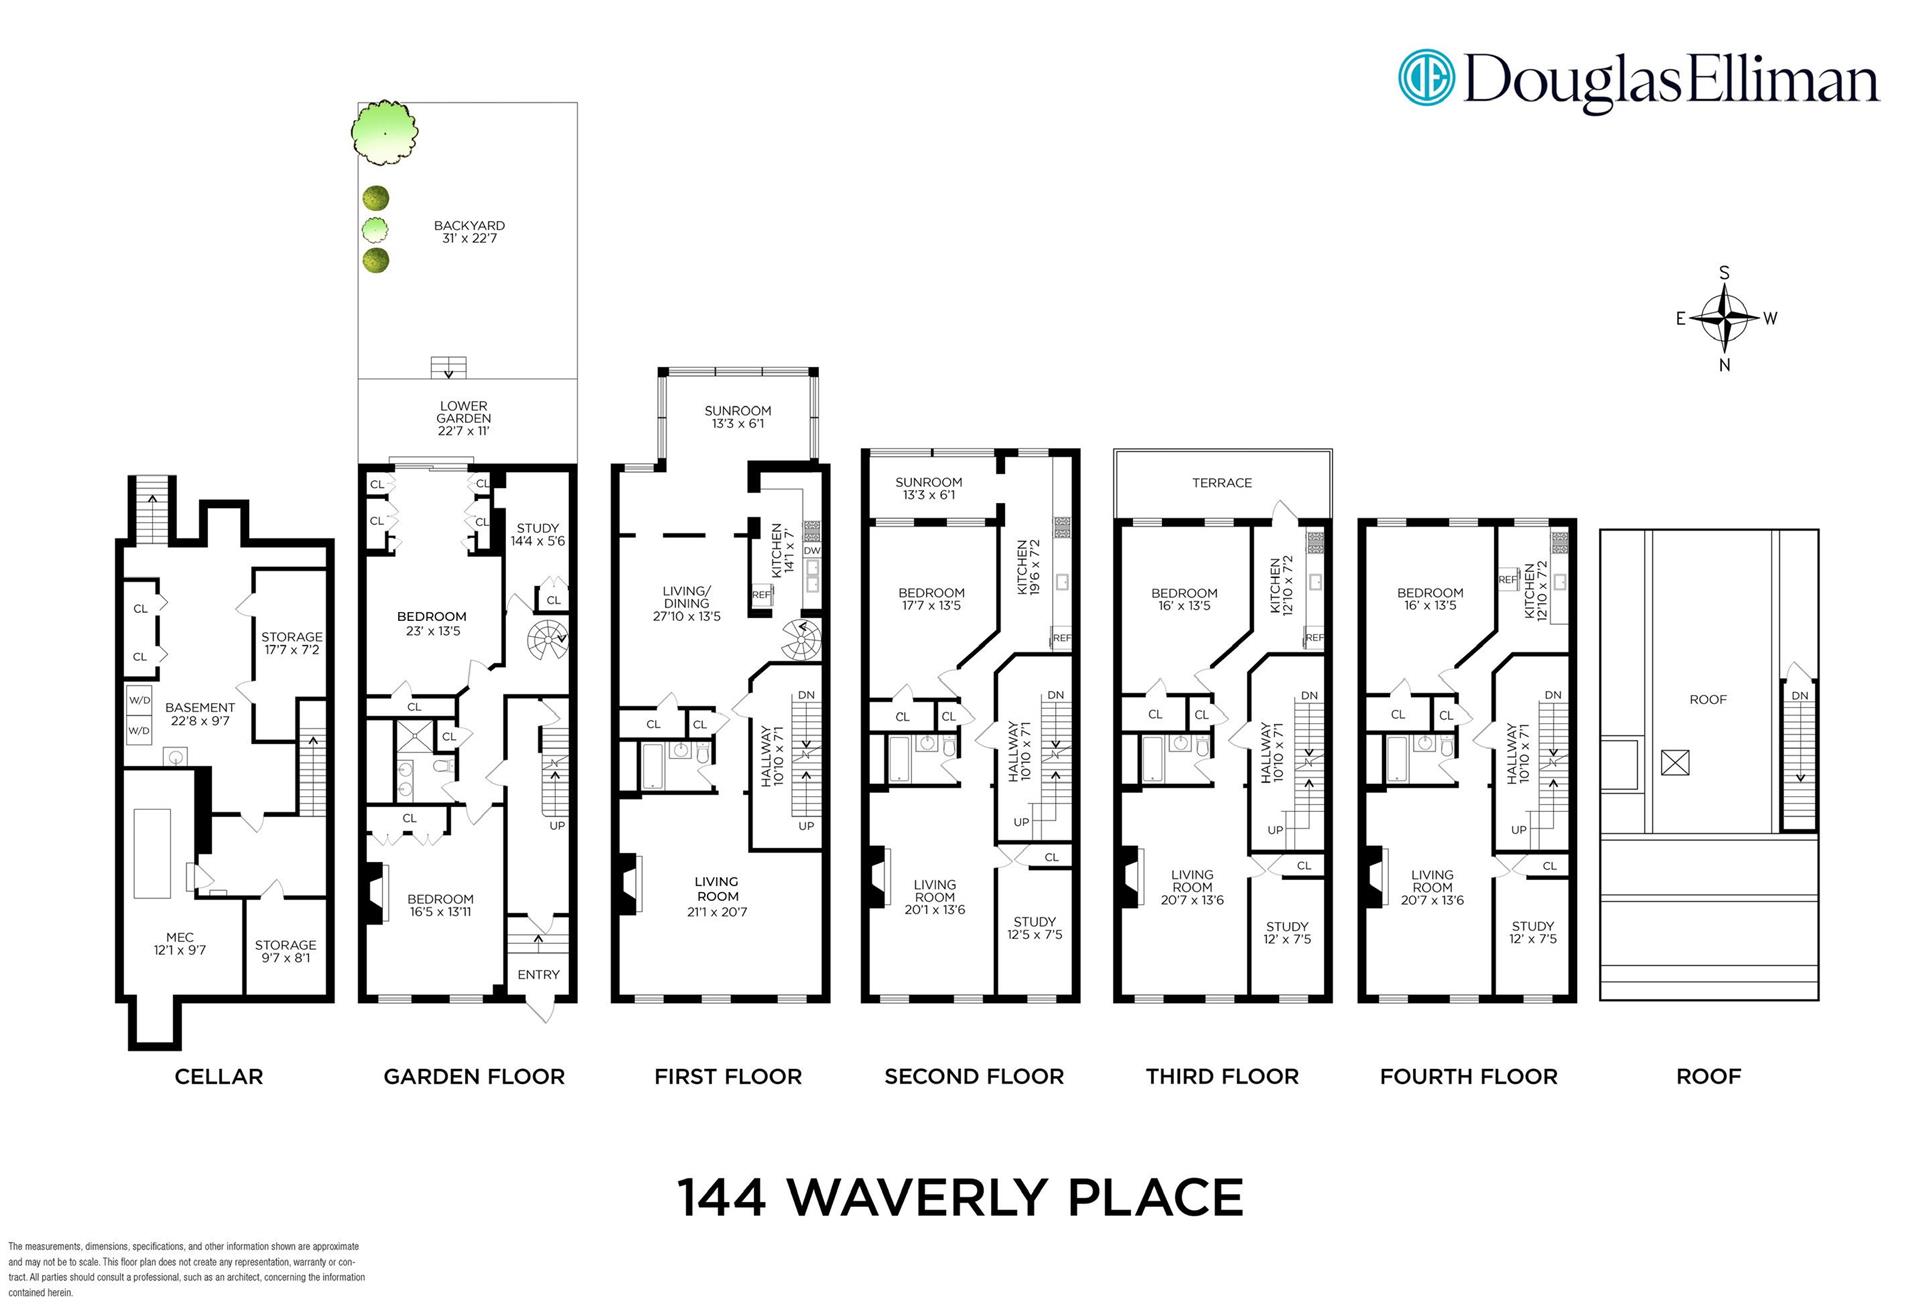 Floorplan for 144 Waverly Place